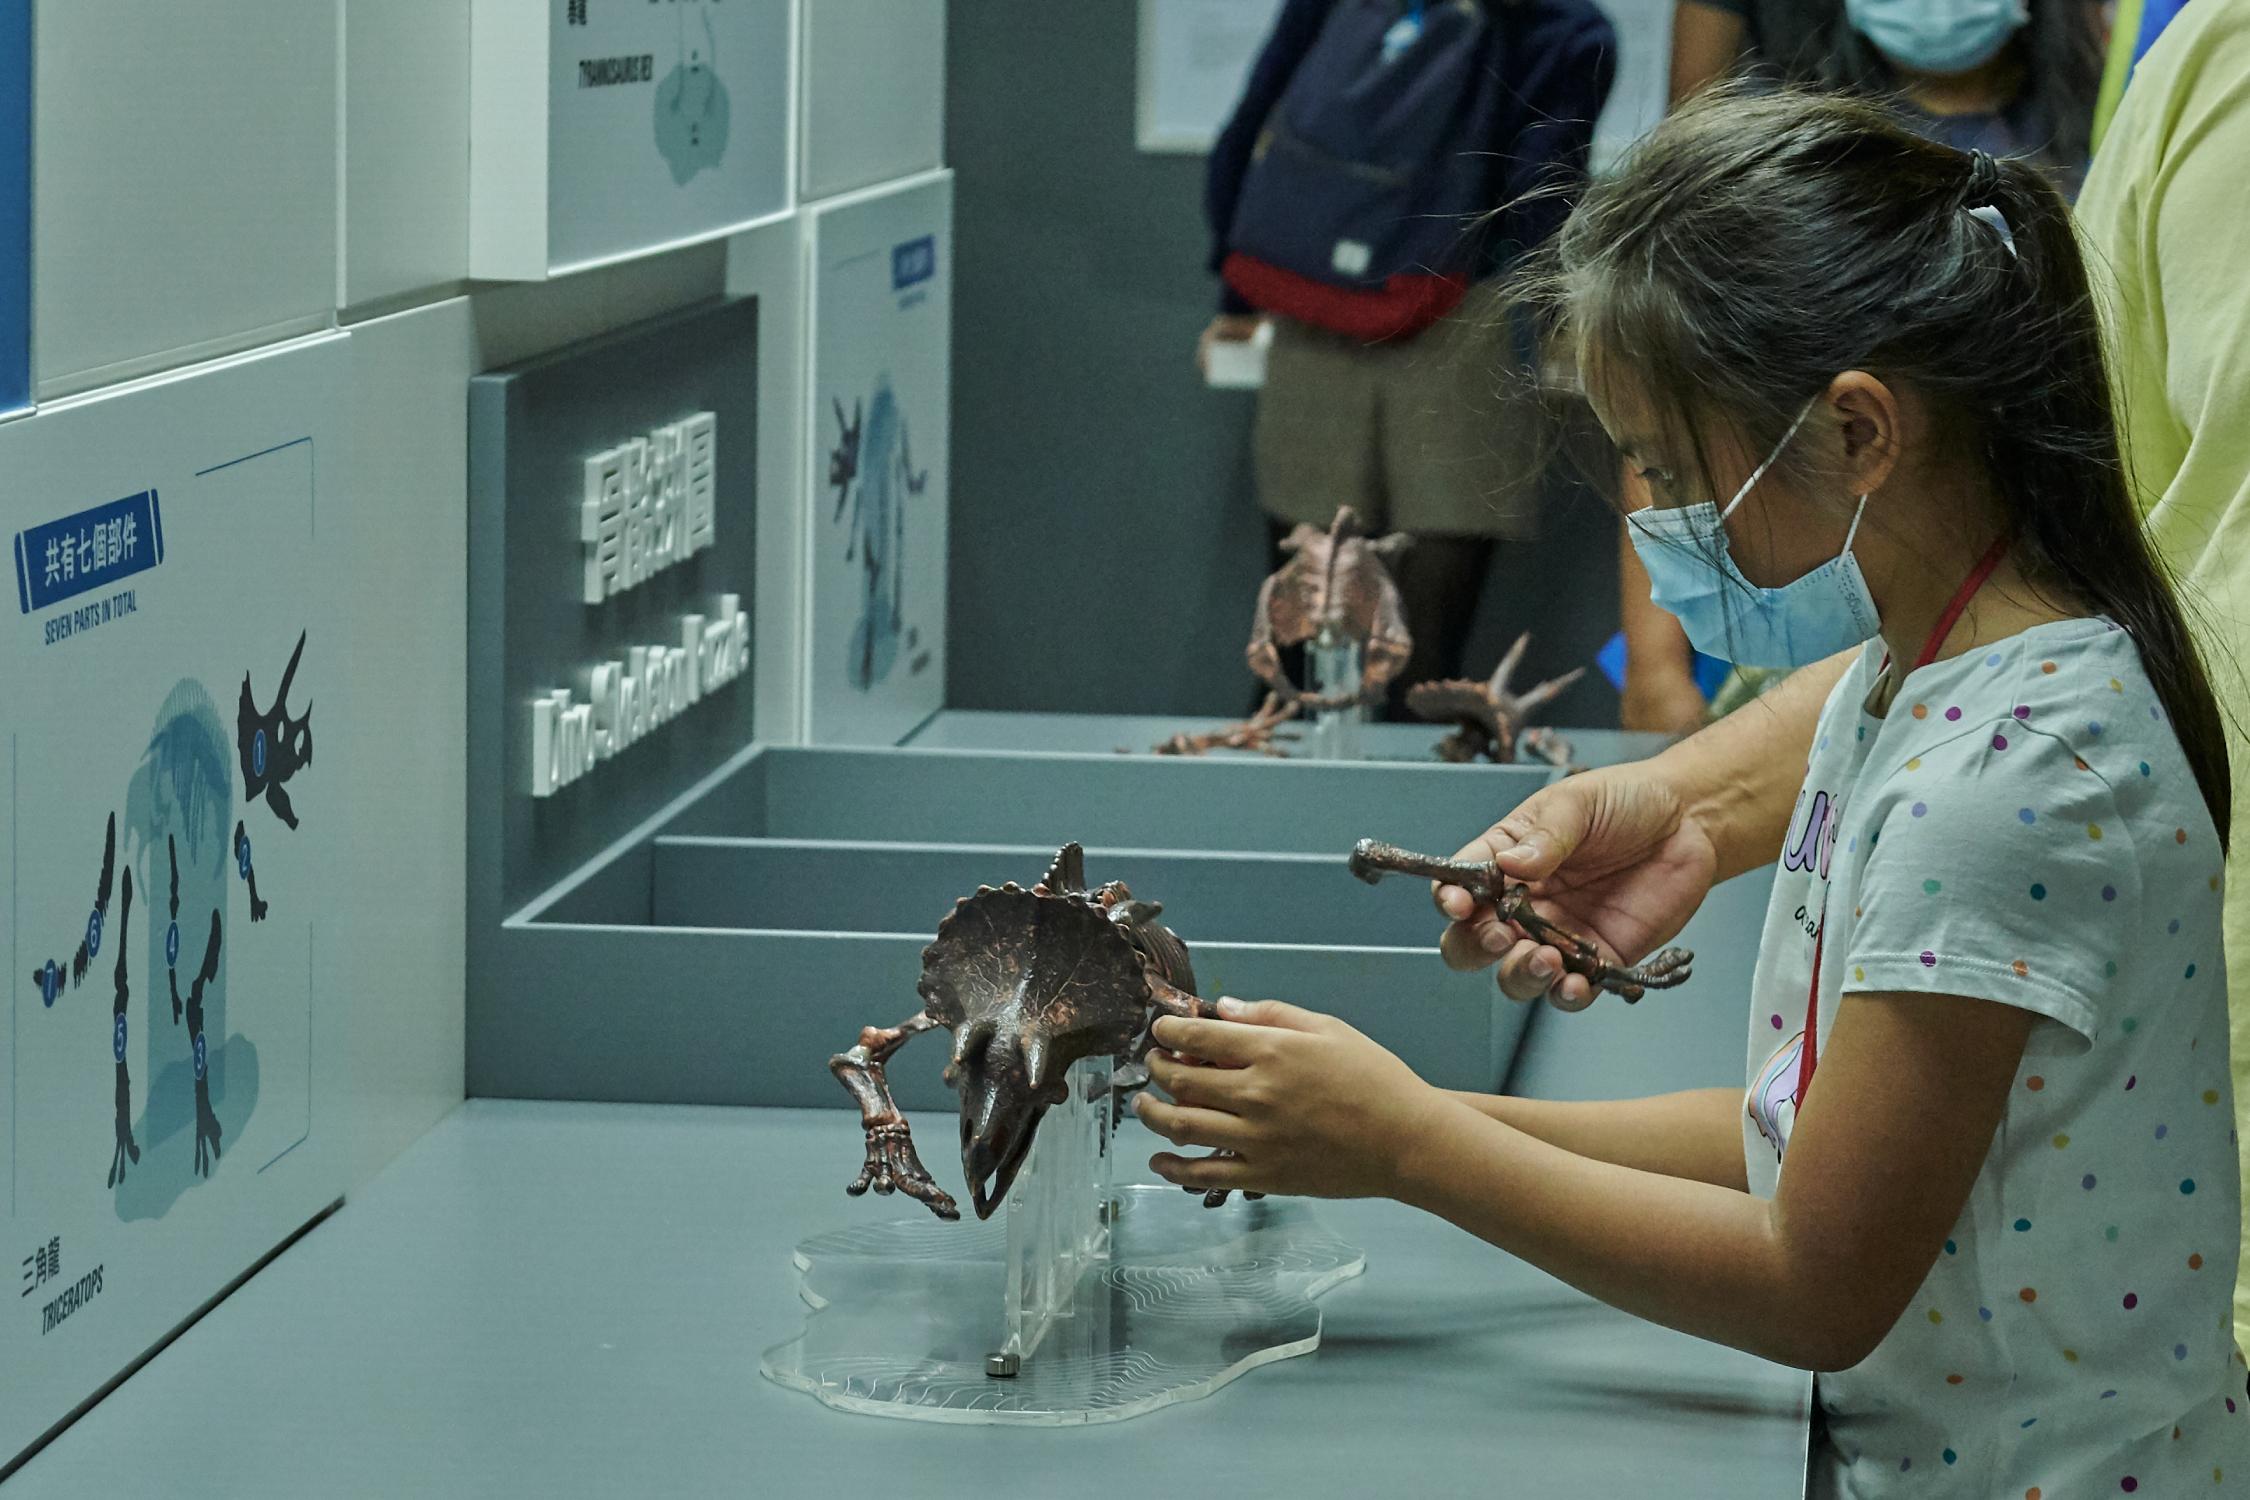 The free large-scale dinosaur exhibition "The Hong Kong Jockey Club Series: The Big Eight - Dinosaur Revelation" organised by the Hong Kong Science Museum has been receiving an overwhelming response from the public since its opening. The museum will extend the exhibition period to February 22, 2023. Picture shows a visitor carefully assembling a model skeleton of a triceratops.